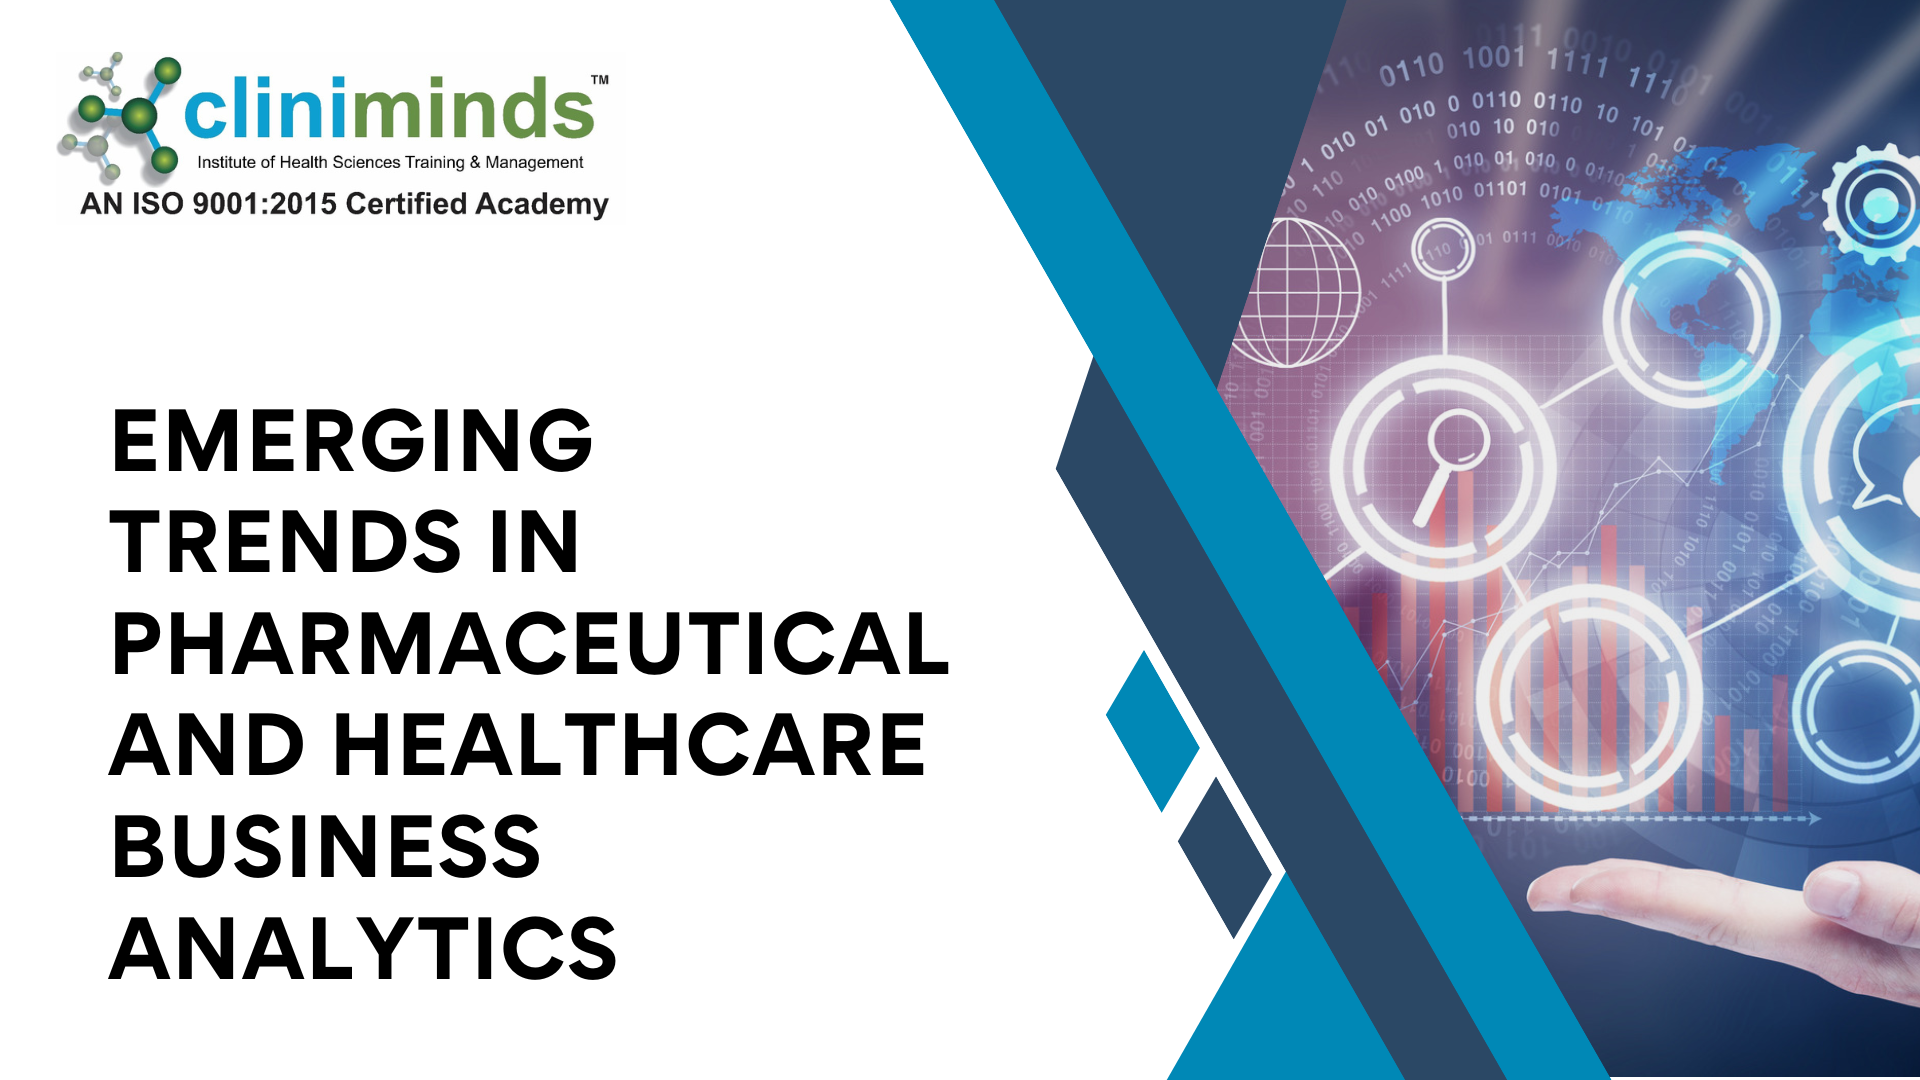 EMERGING TRENDS IN PHARMACEUTICAL AND HEALTHCARE BUSINESS ANALYTICS